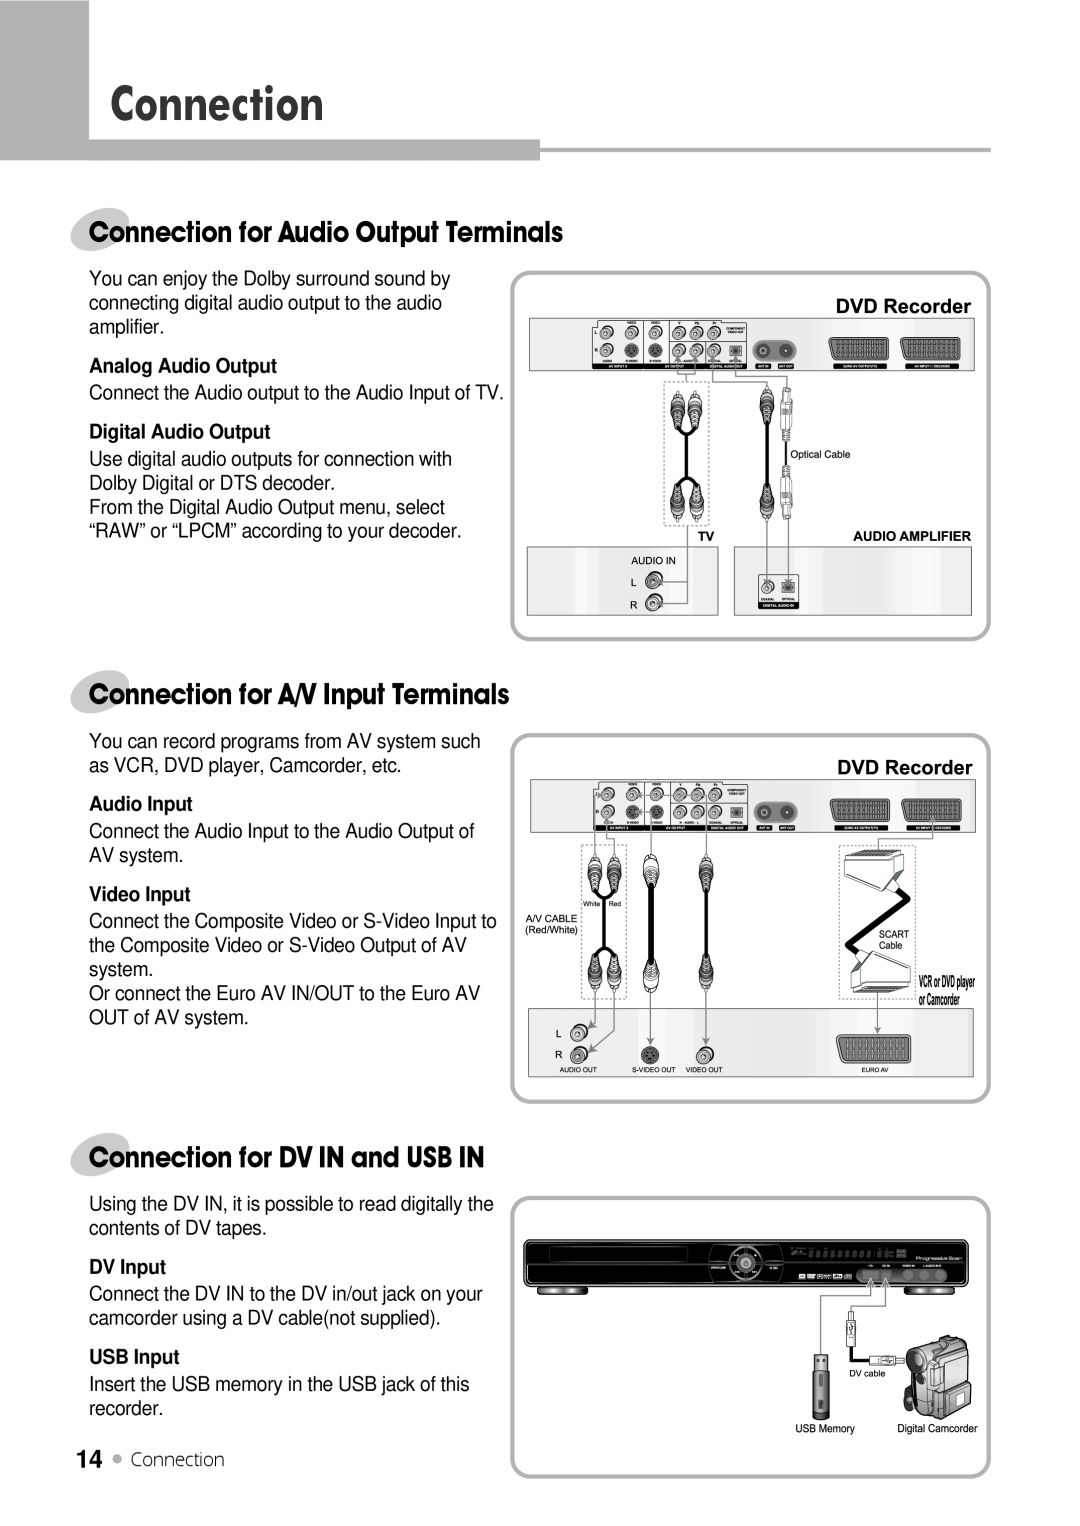 H & B DRX-430 Connection for Audio Output Terminals, Connection for A/V Input Terminals, Connection for DV IN and USB IN 